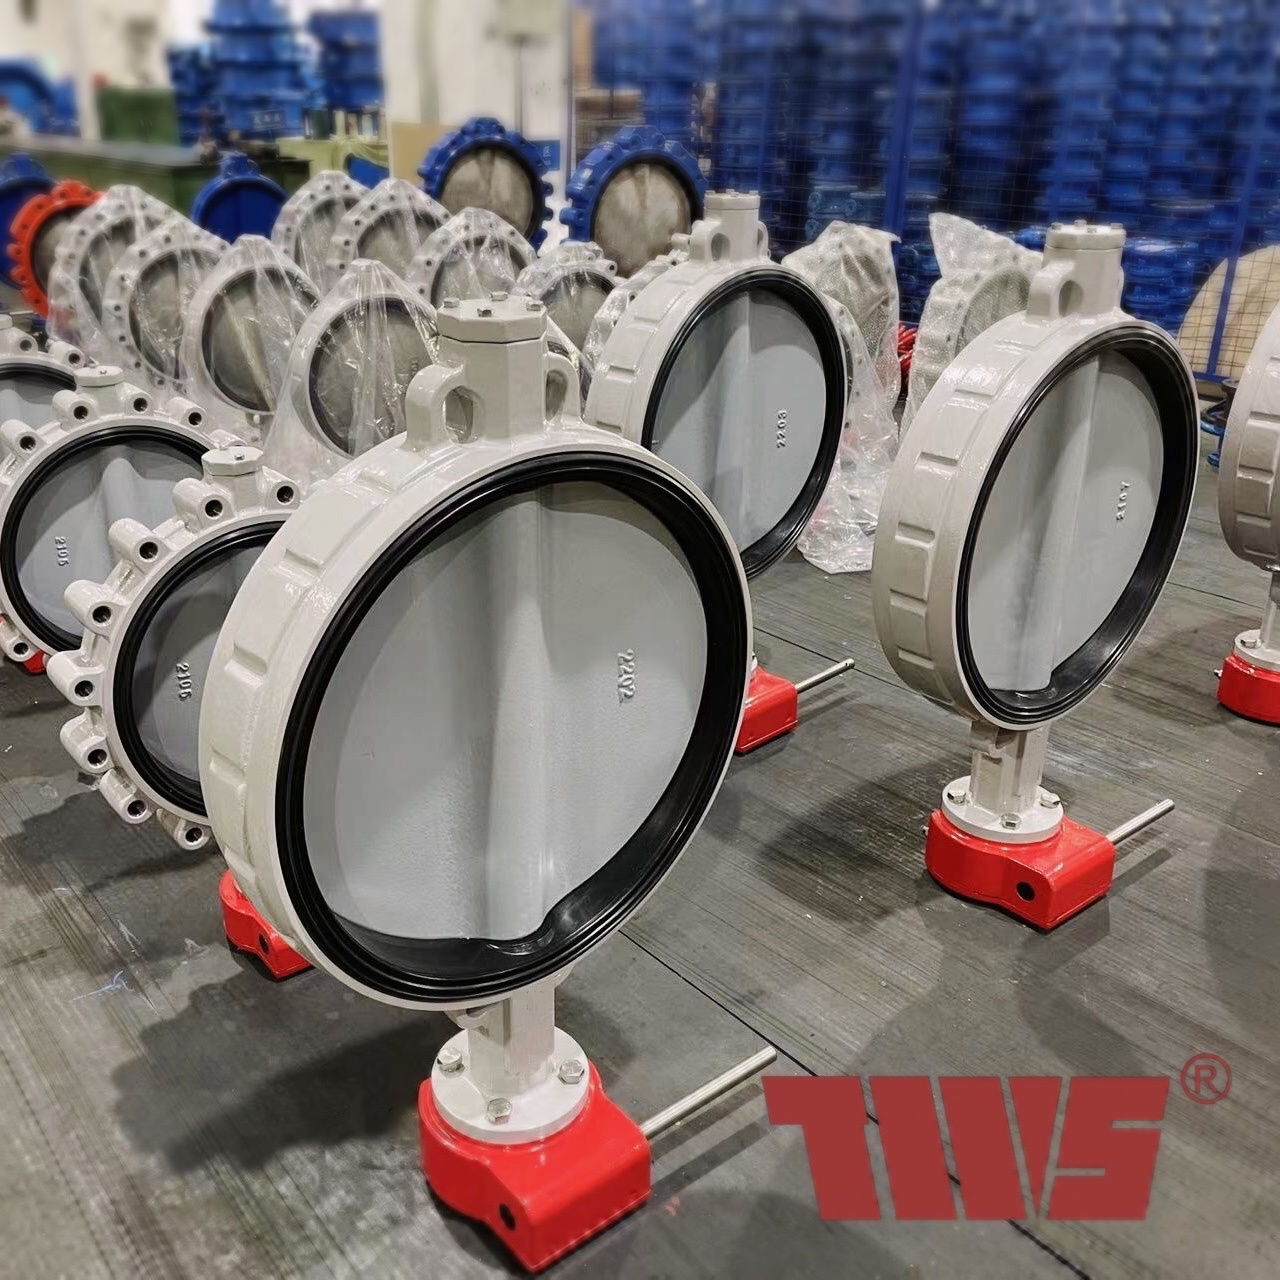 What are the ways of connecting the butterfly valve to the pipeline?